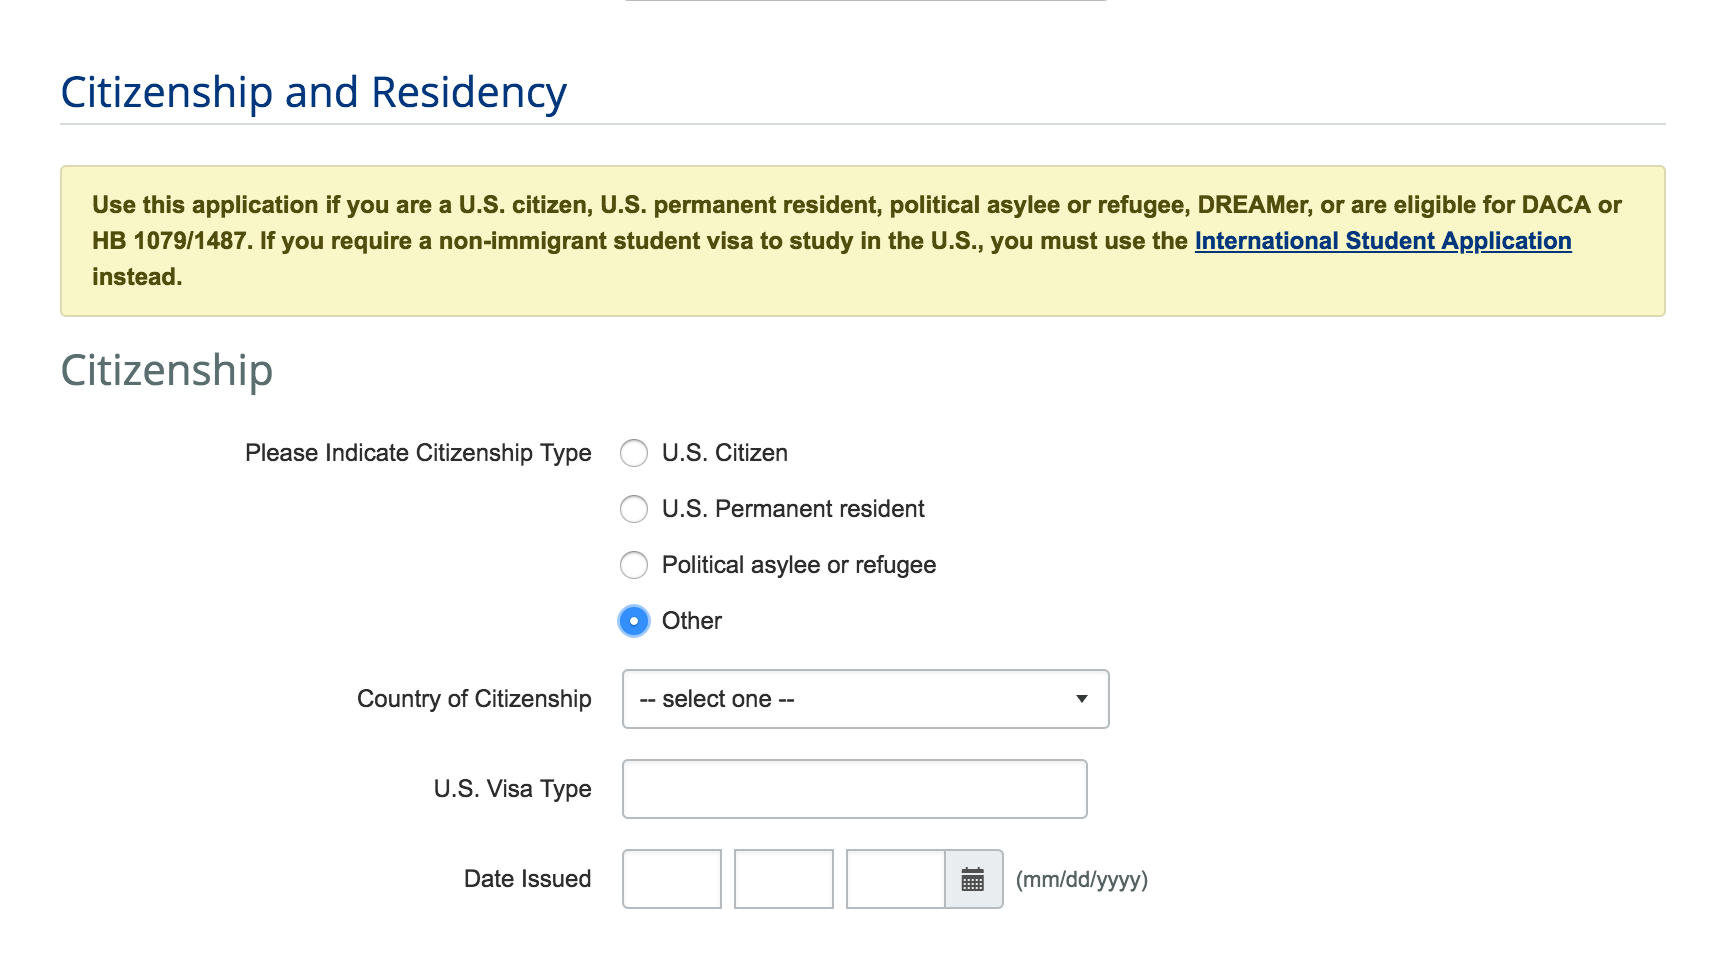 On the application, under Citizenship, select Other